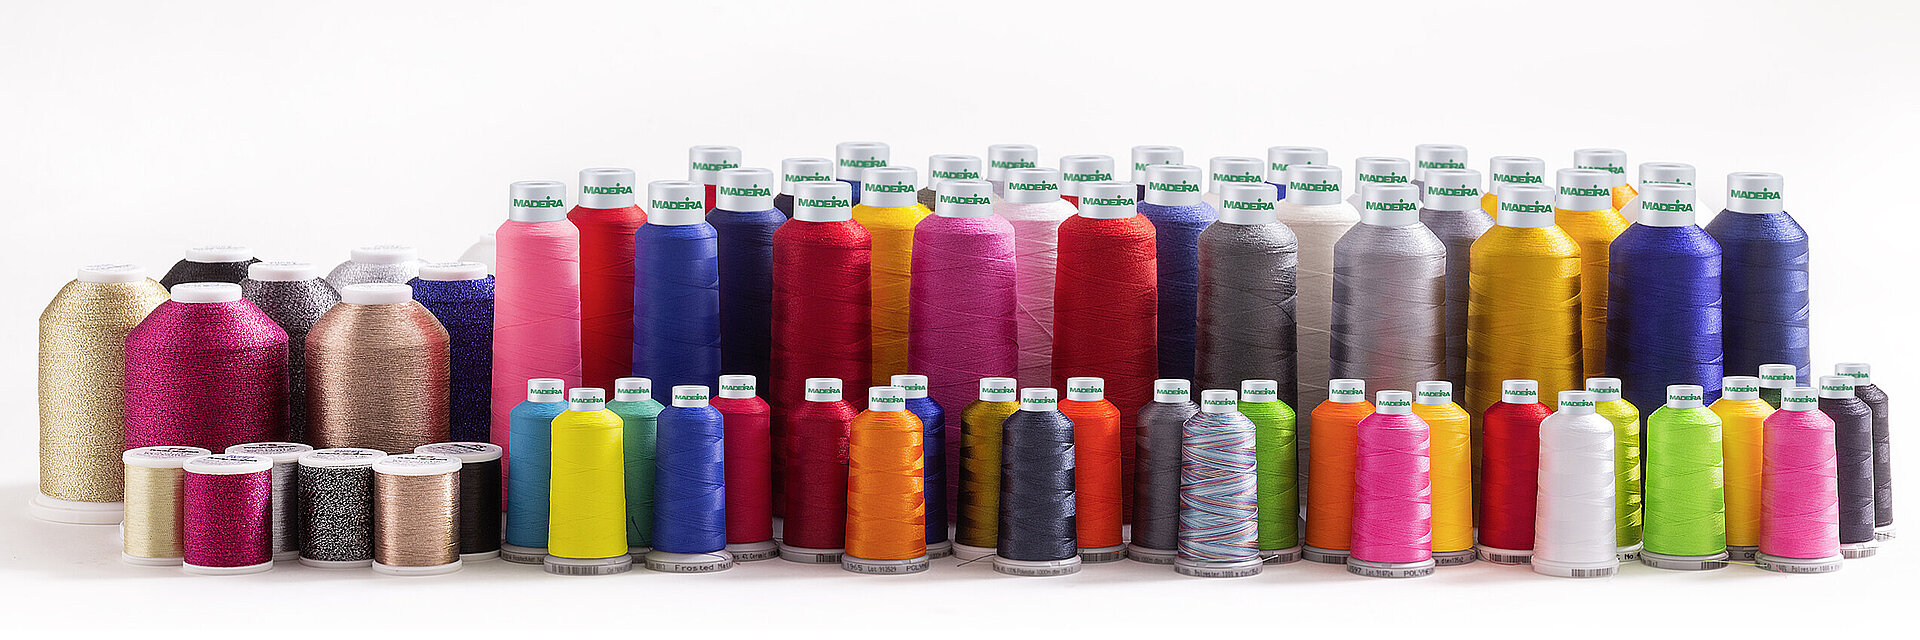 MADEIRA EMBROIDERY THREAD ORDER! MY MOST USED COLORS! 